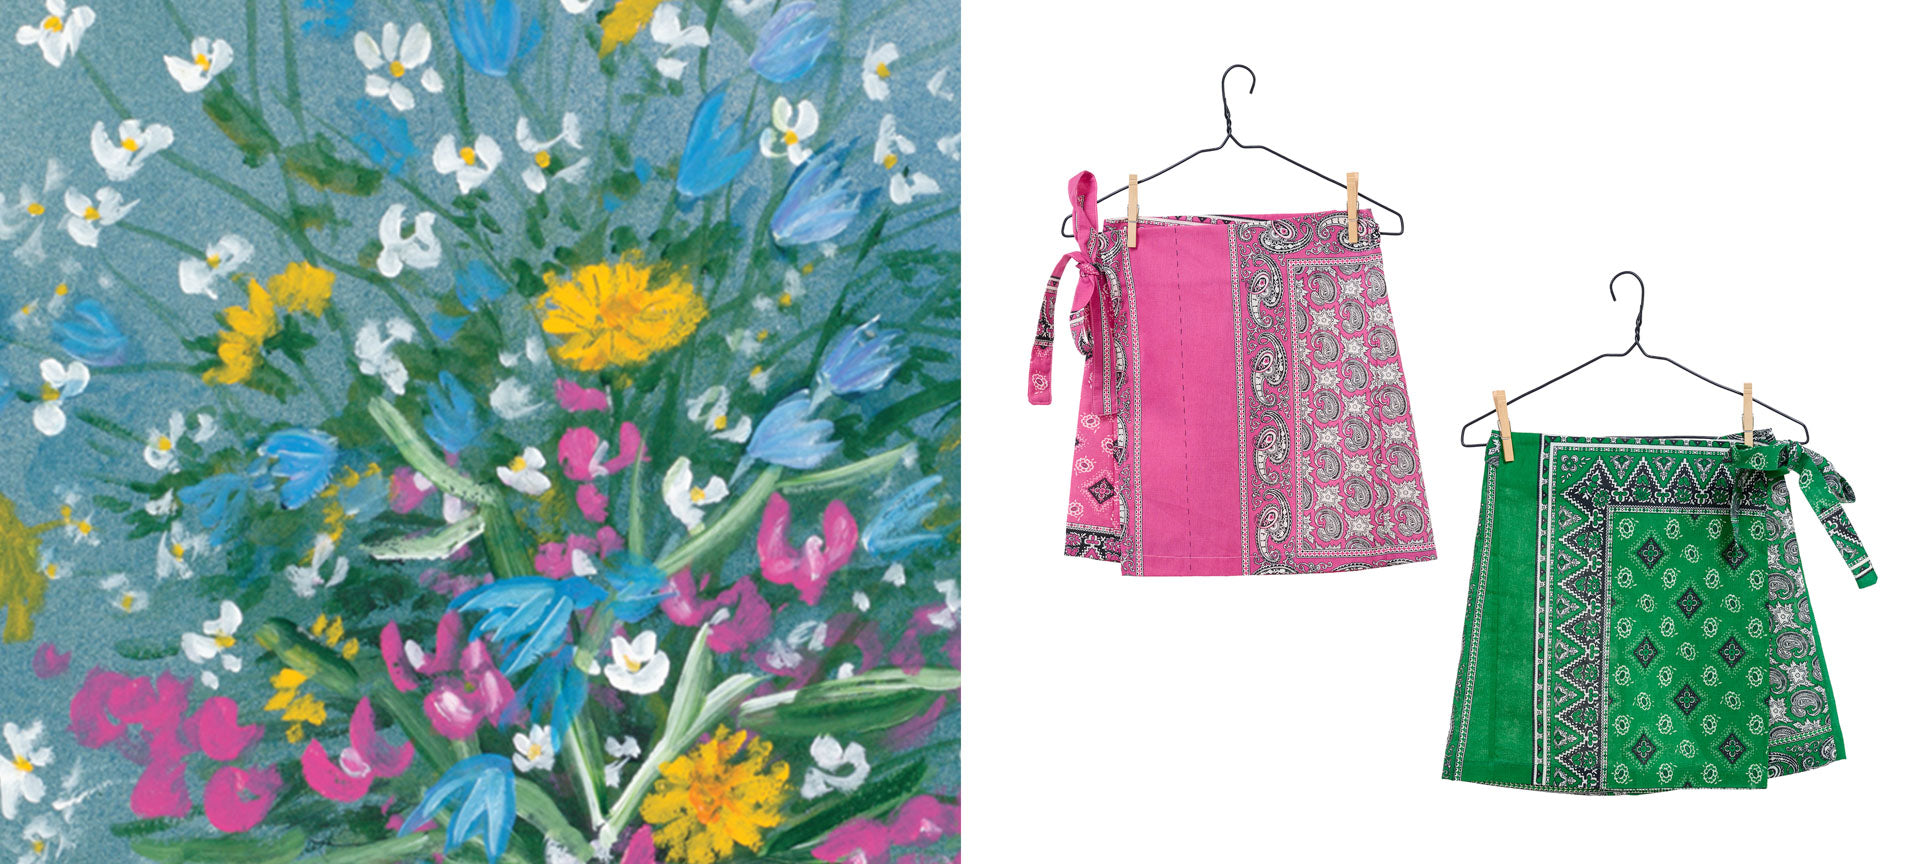 nouveau-choix-collection-image-featuring-floral-bruno-pasquier-desvignes-painting-and-bandana-print-faye-wrap-skirts